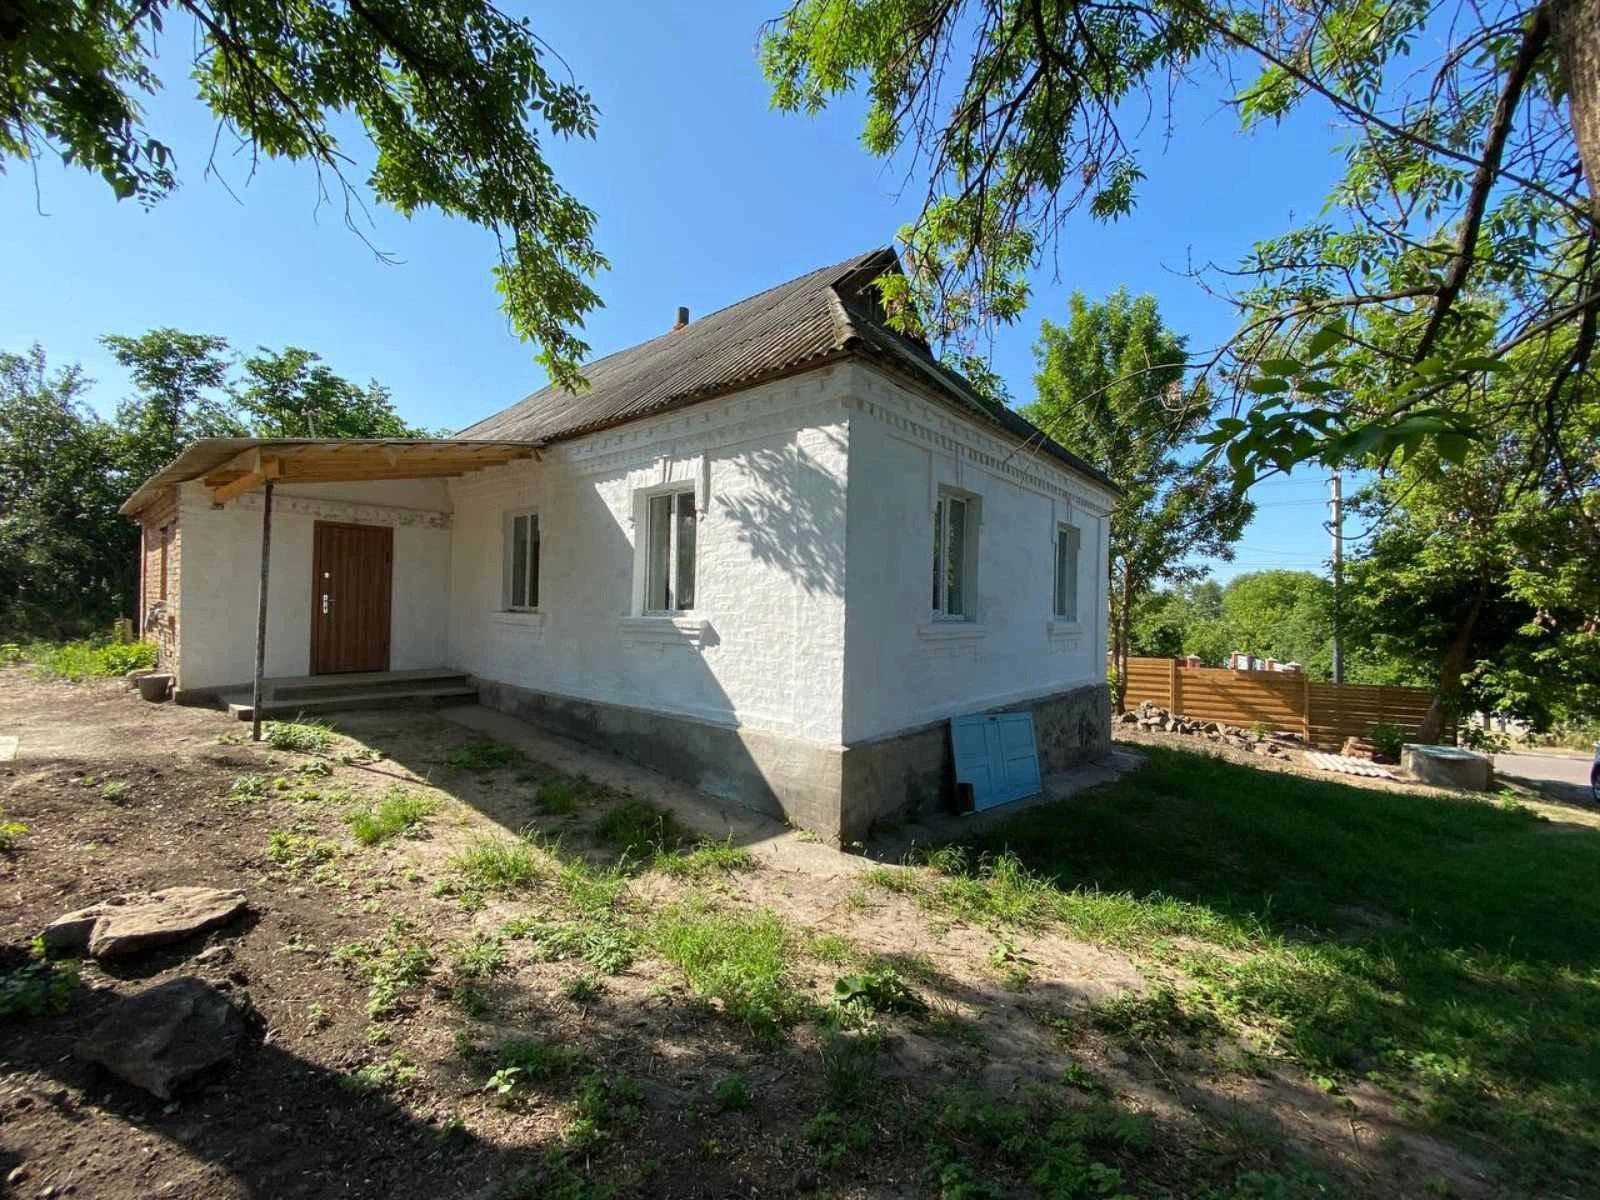 House for sale. 4 rooms, 90 m², 1 floor. Trushky. 